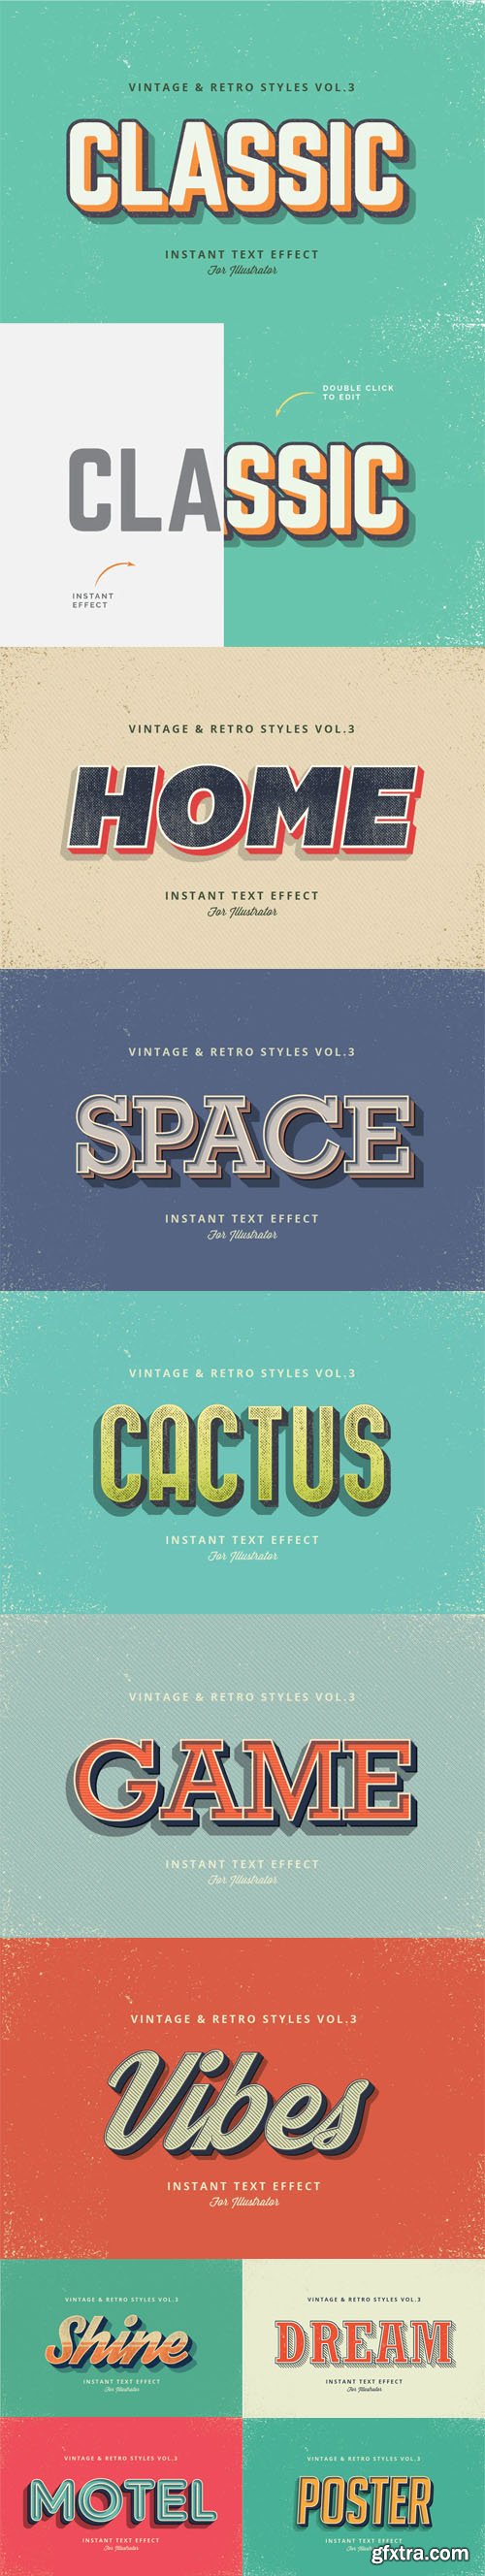 10 Vintage and Retro Graphic Styles Vol.3 for Adobe Illustrator